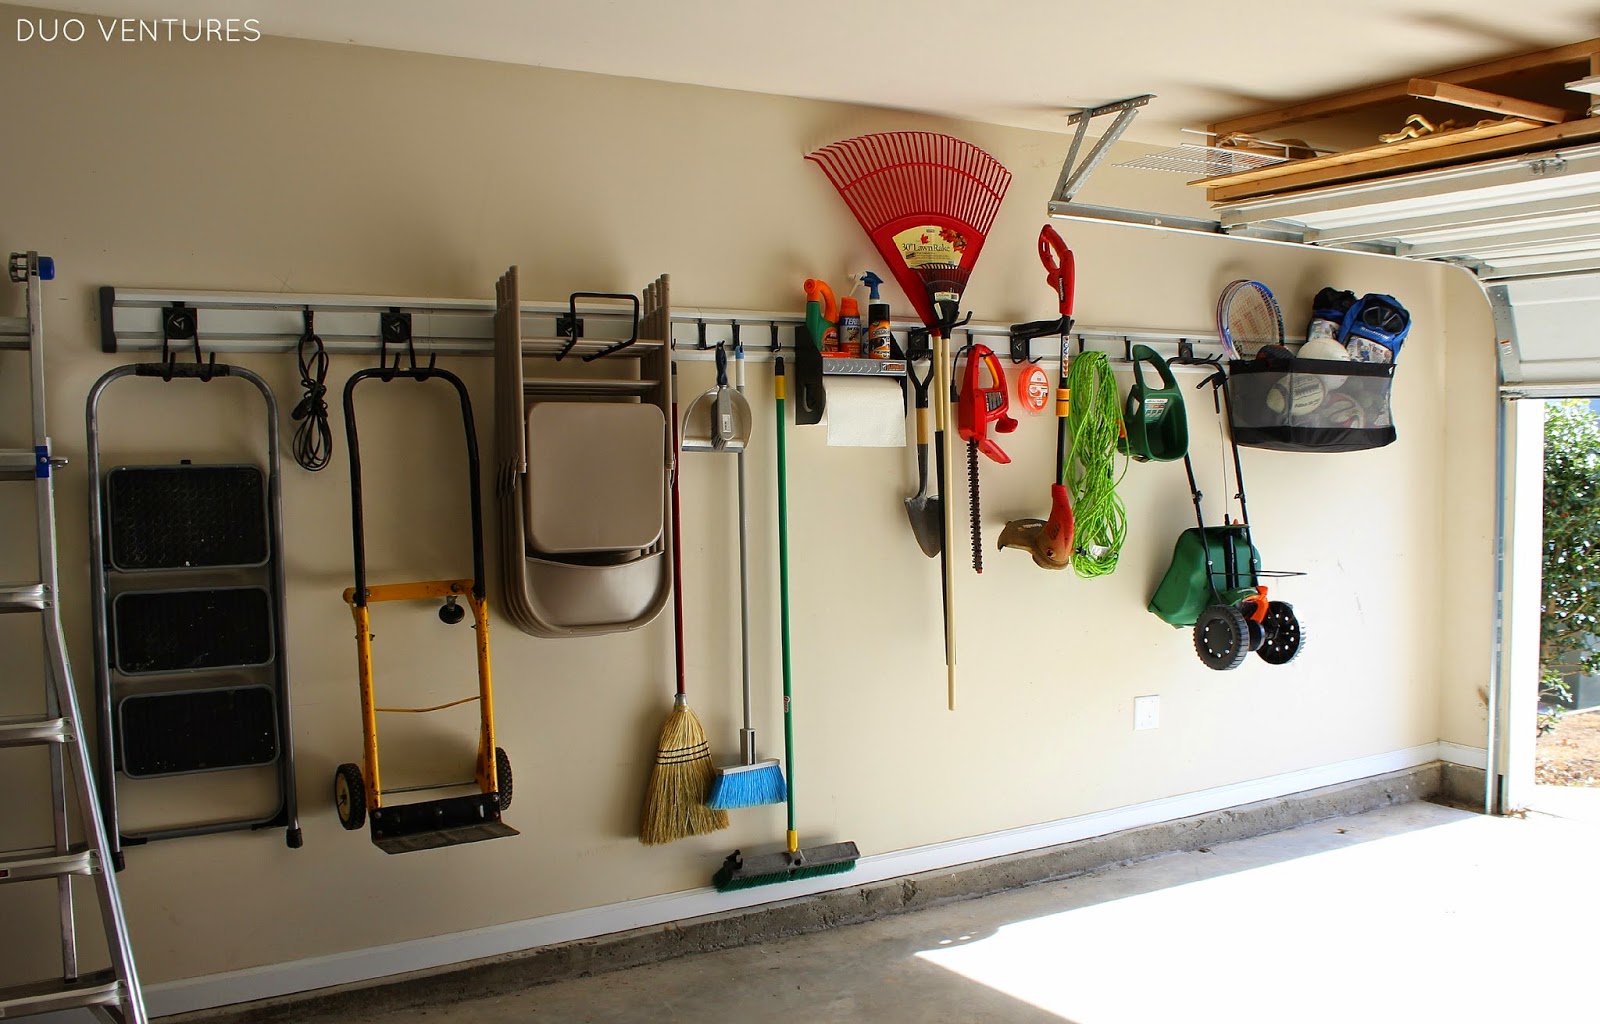 Duo Ventures: The Garage: Wall Track System